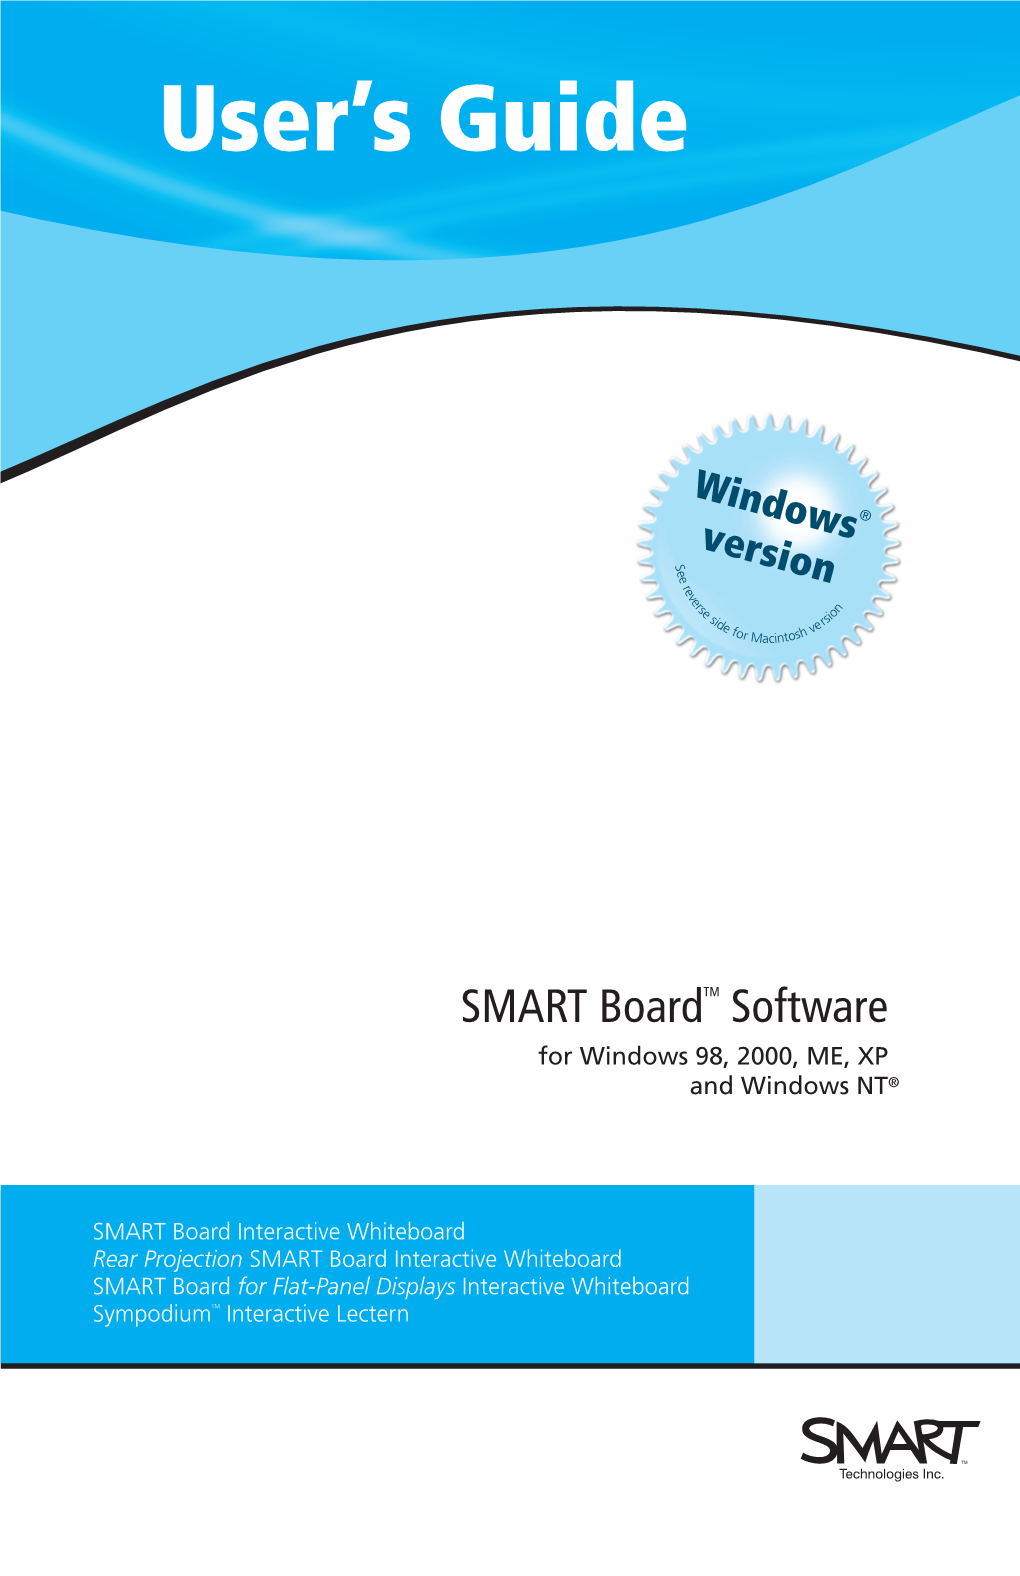 SMART Board Software User's Guide for Windows Operating Systems